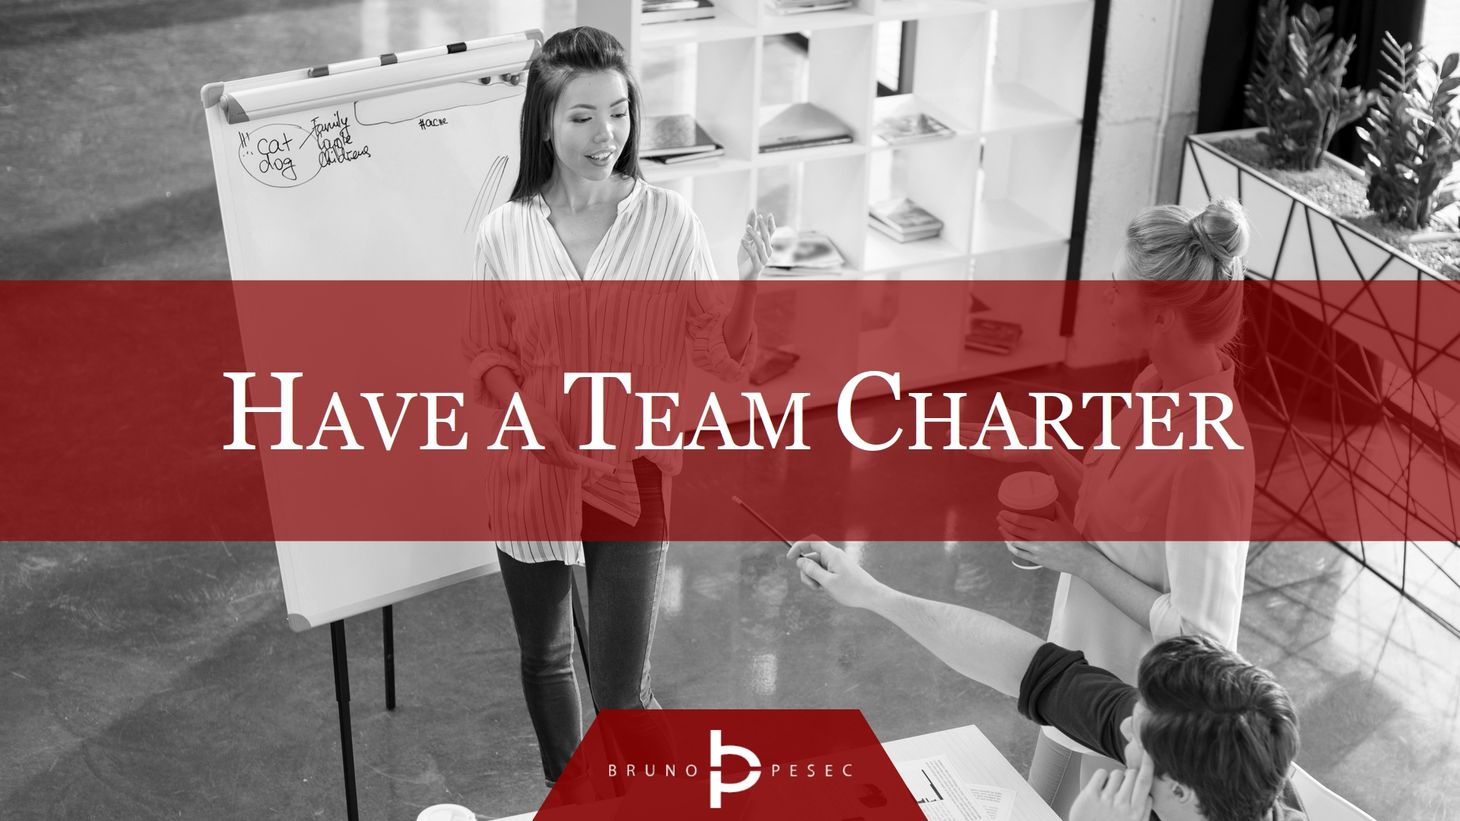 Have a team charter